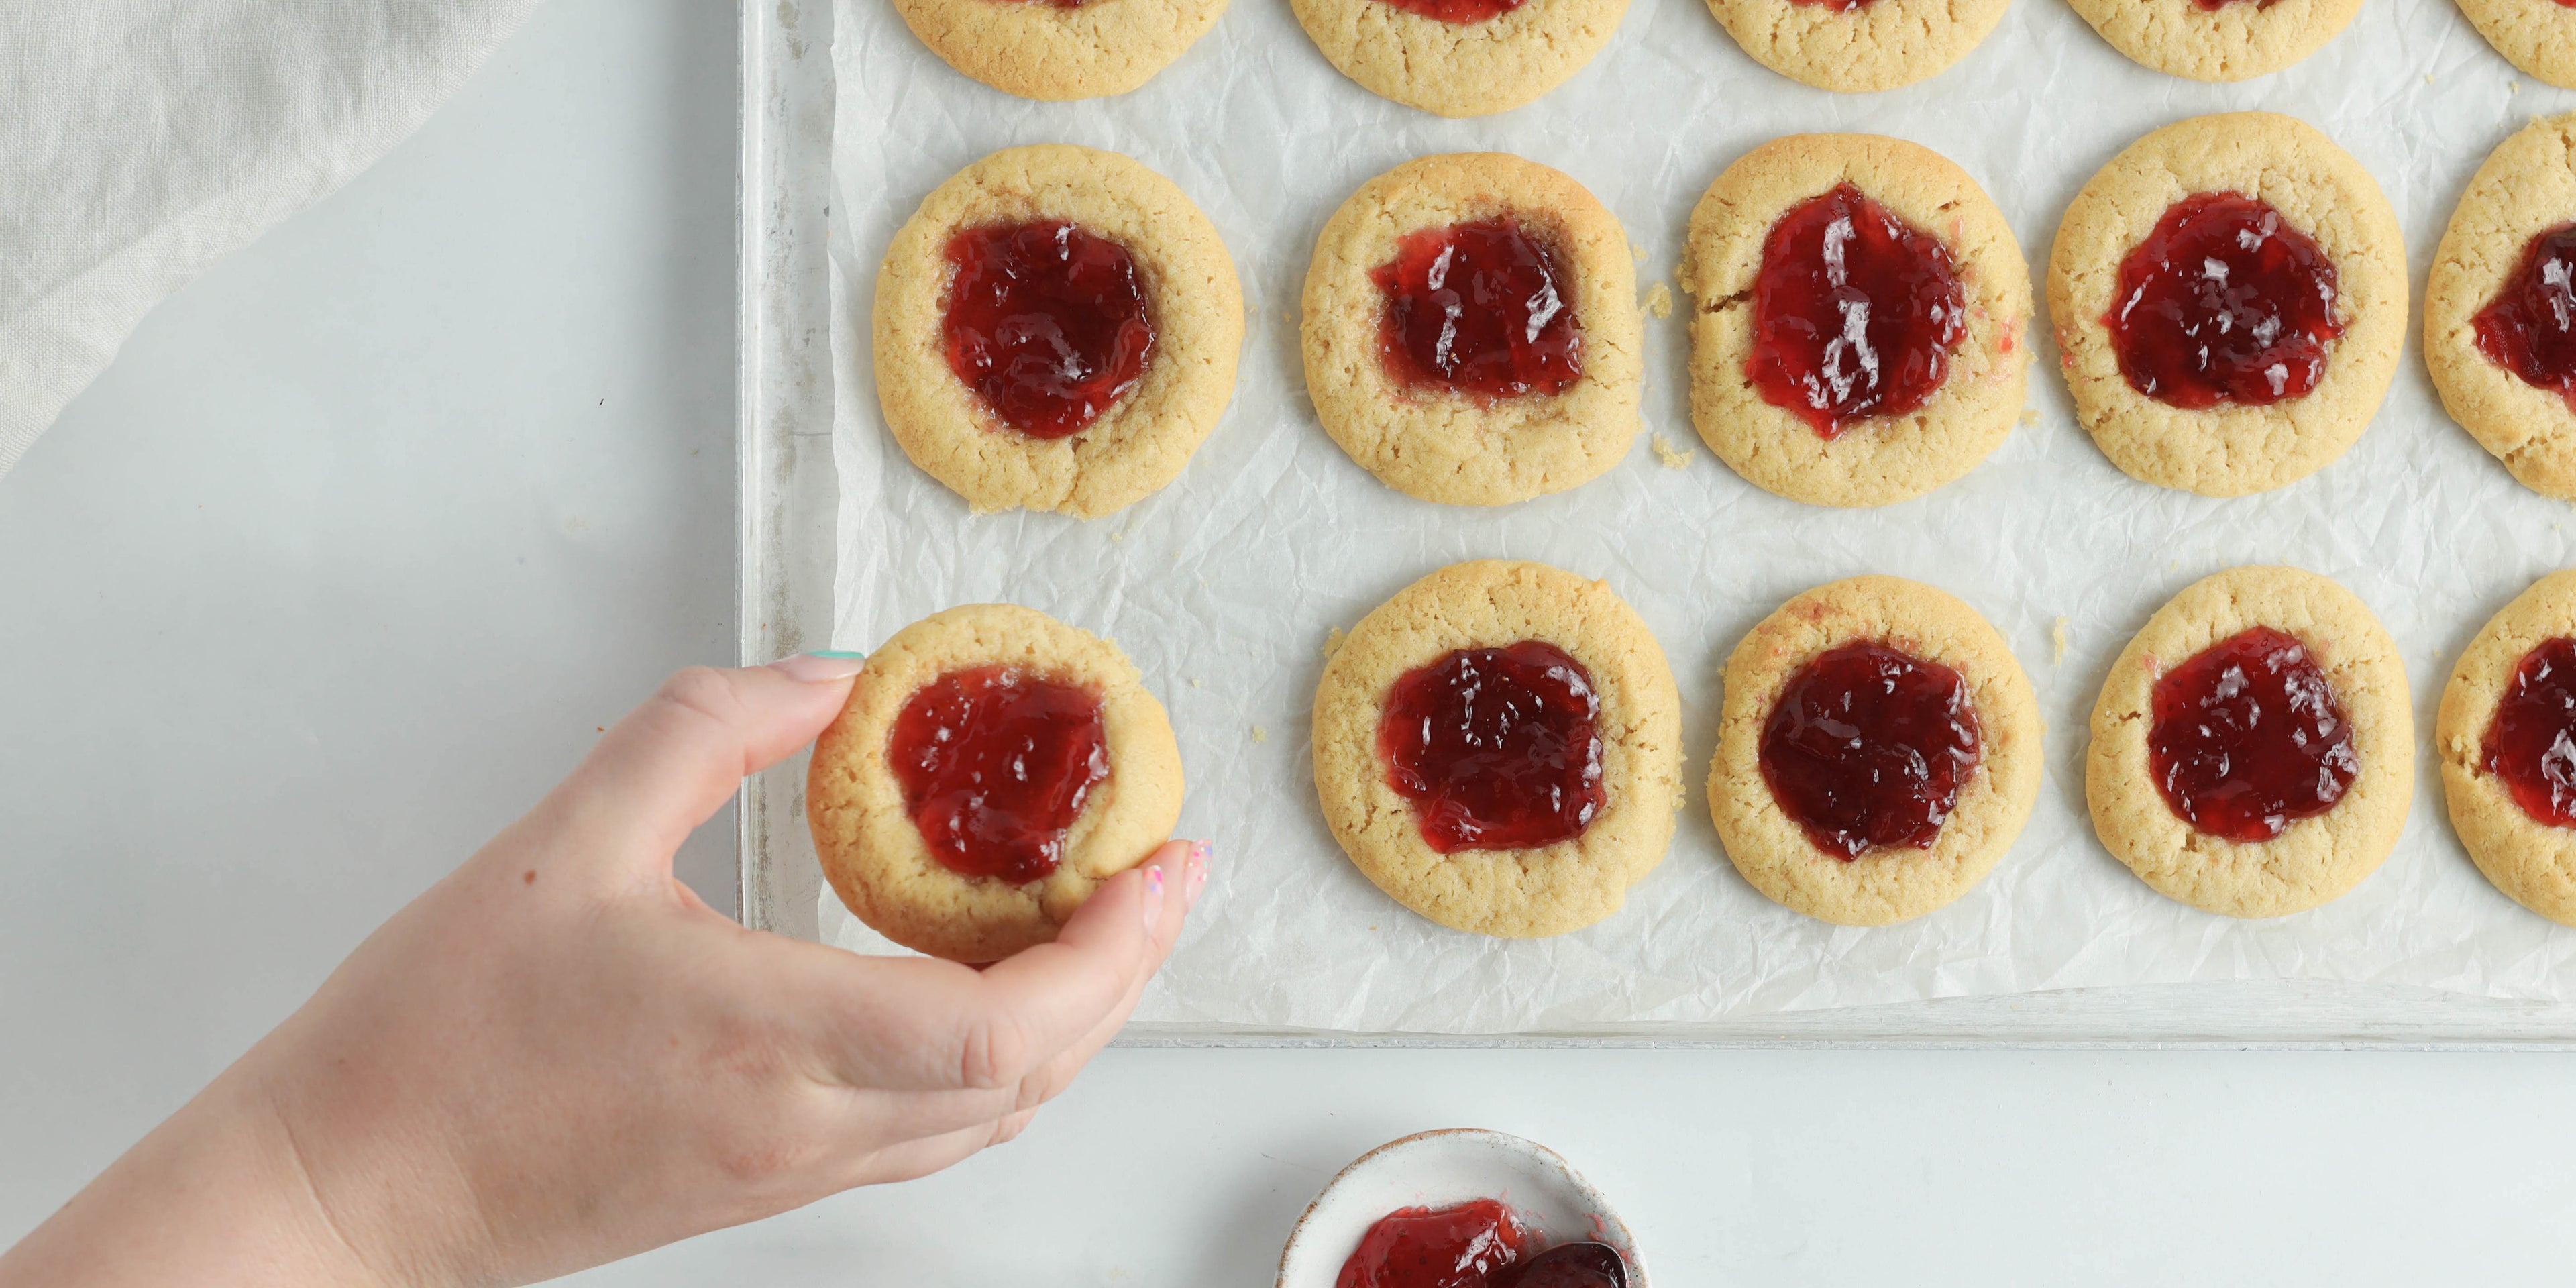 Tray of circular biscuits with jam on top and a hand reaching in to take one